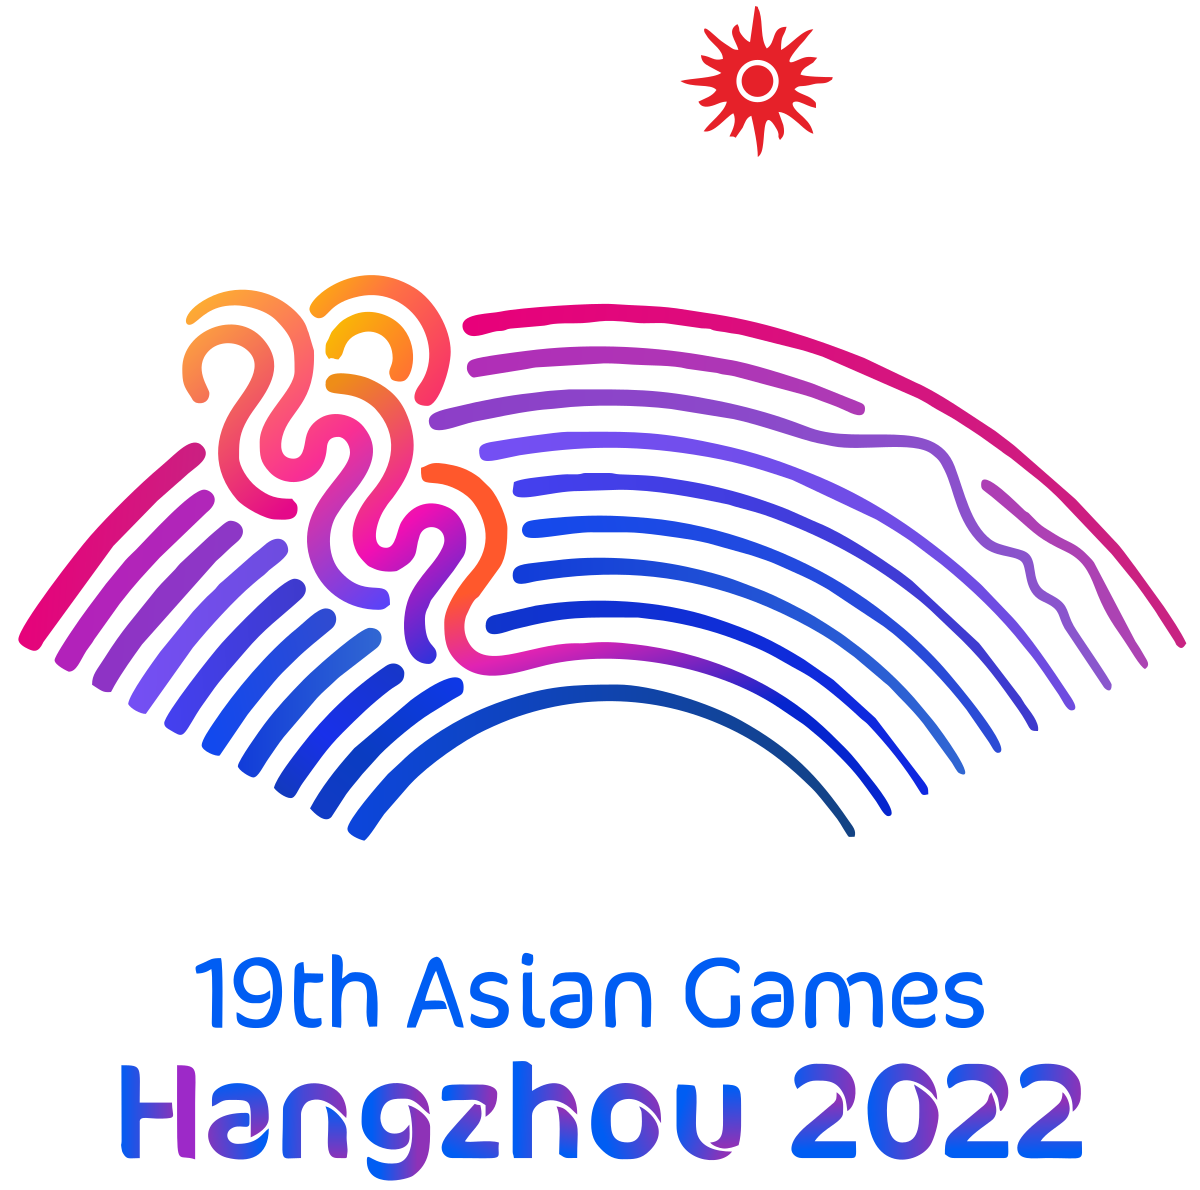 Hangzhou 2022 has said at least six events will be held to mark one year to go ©Hangzhou 2022